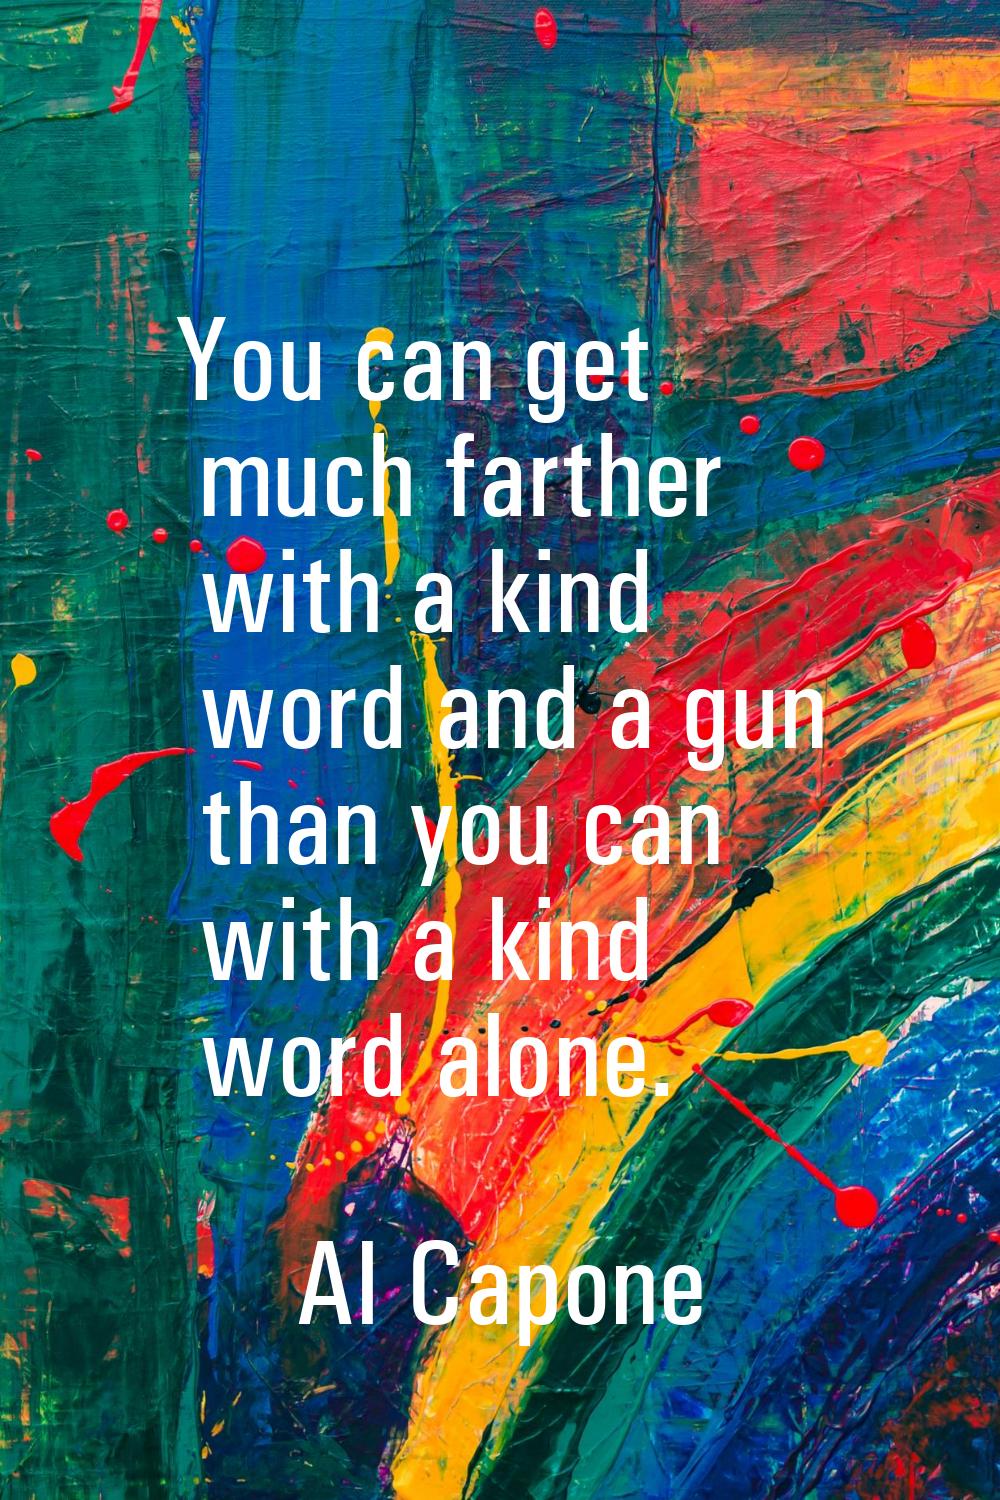 You can get much farther with a kind word and a gun than you can with a kind word alone.